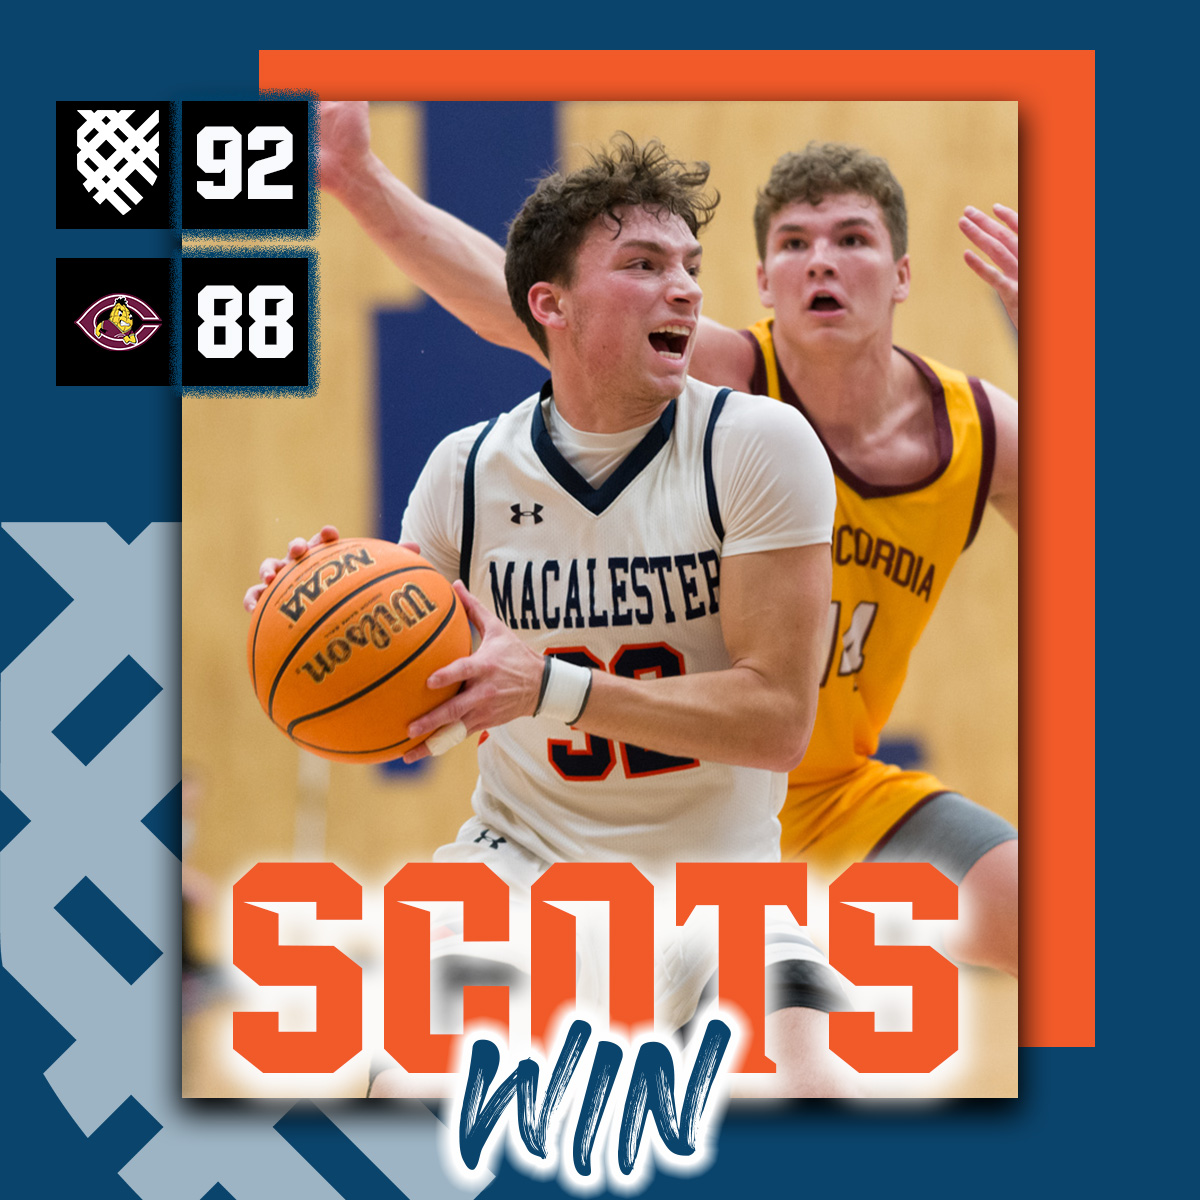 SCOTS WIN! 51 big ones for @_CalebWilliams3 in a big road win for @MacalesterMBB! #ScotsWin #GoScots #heymac